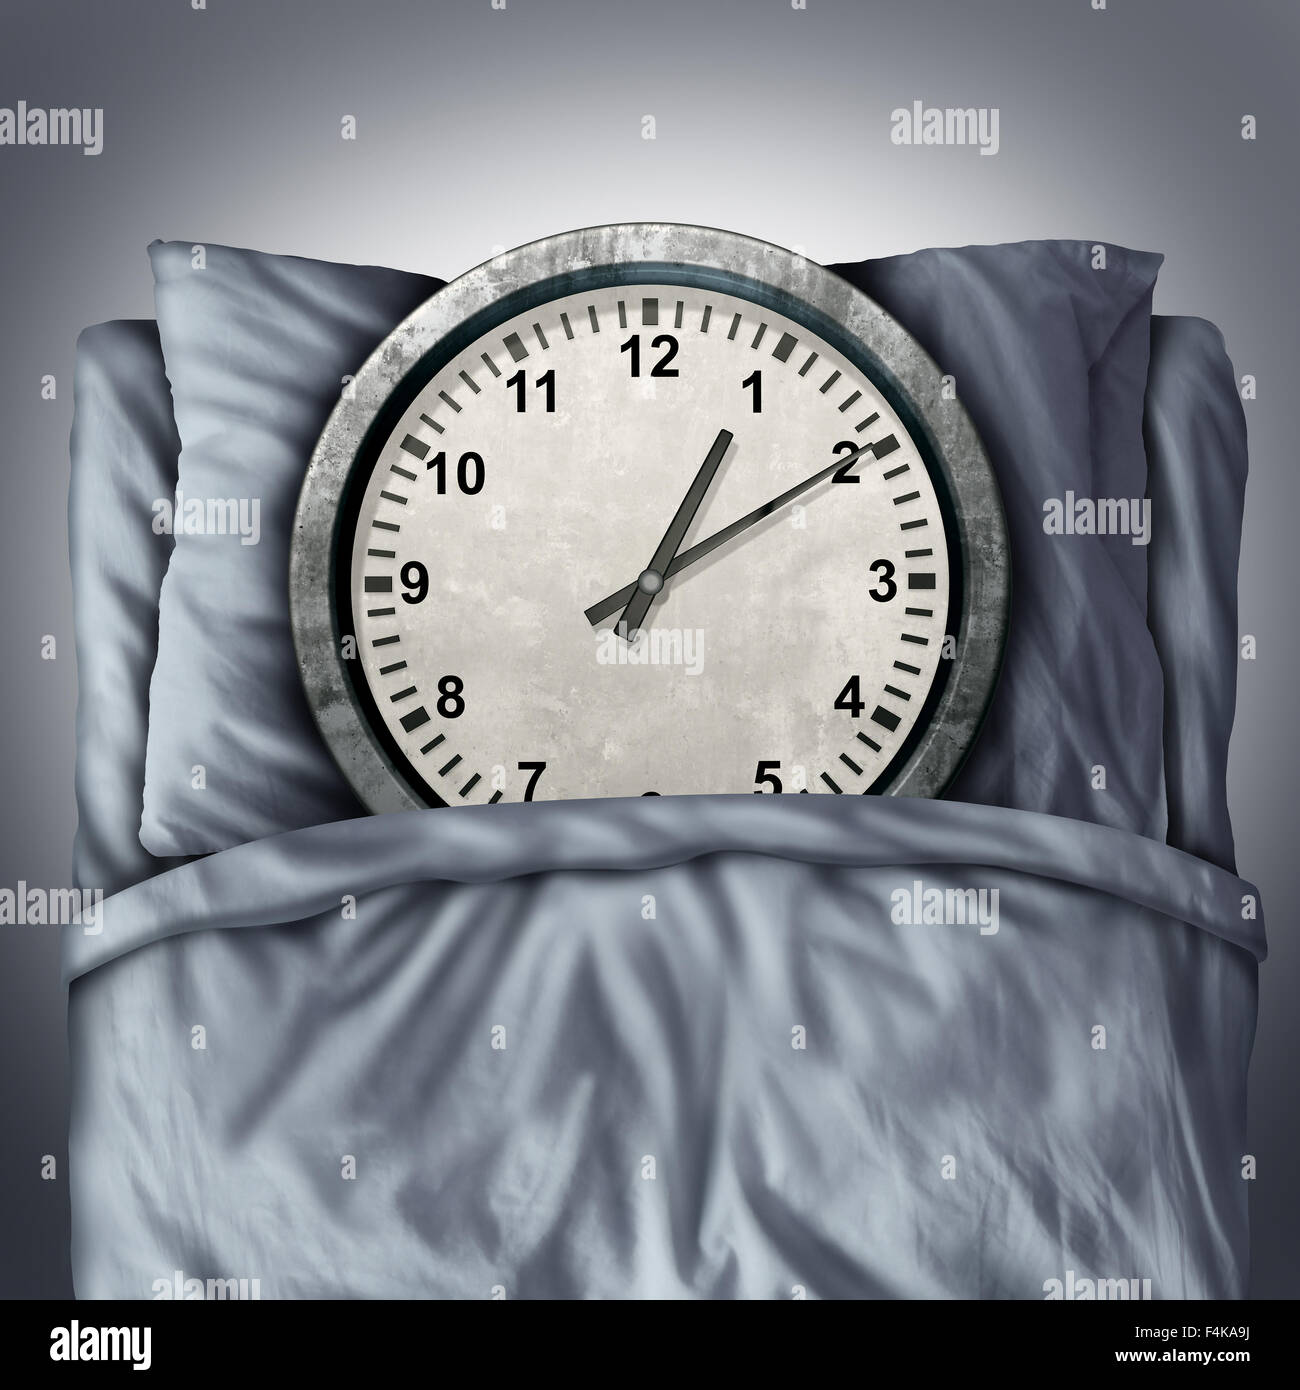 Getting enough sleep concept or sleeping trouble symbol as a clock lying in bed on a pillow as a metaphor for resting and needed relaxation for a healthy mind and body or appointment  schedule stress. Stock Photo